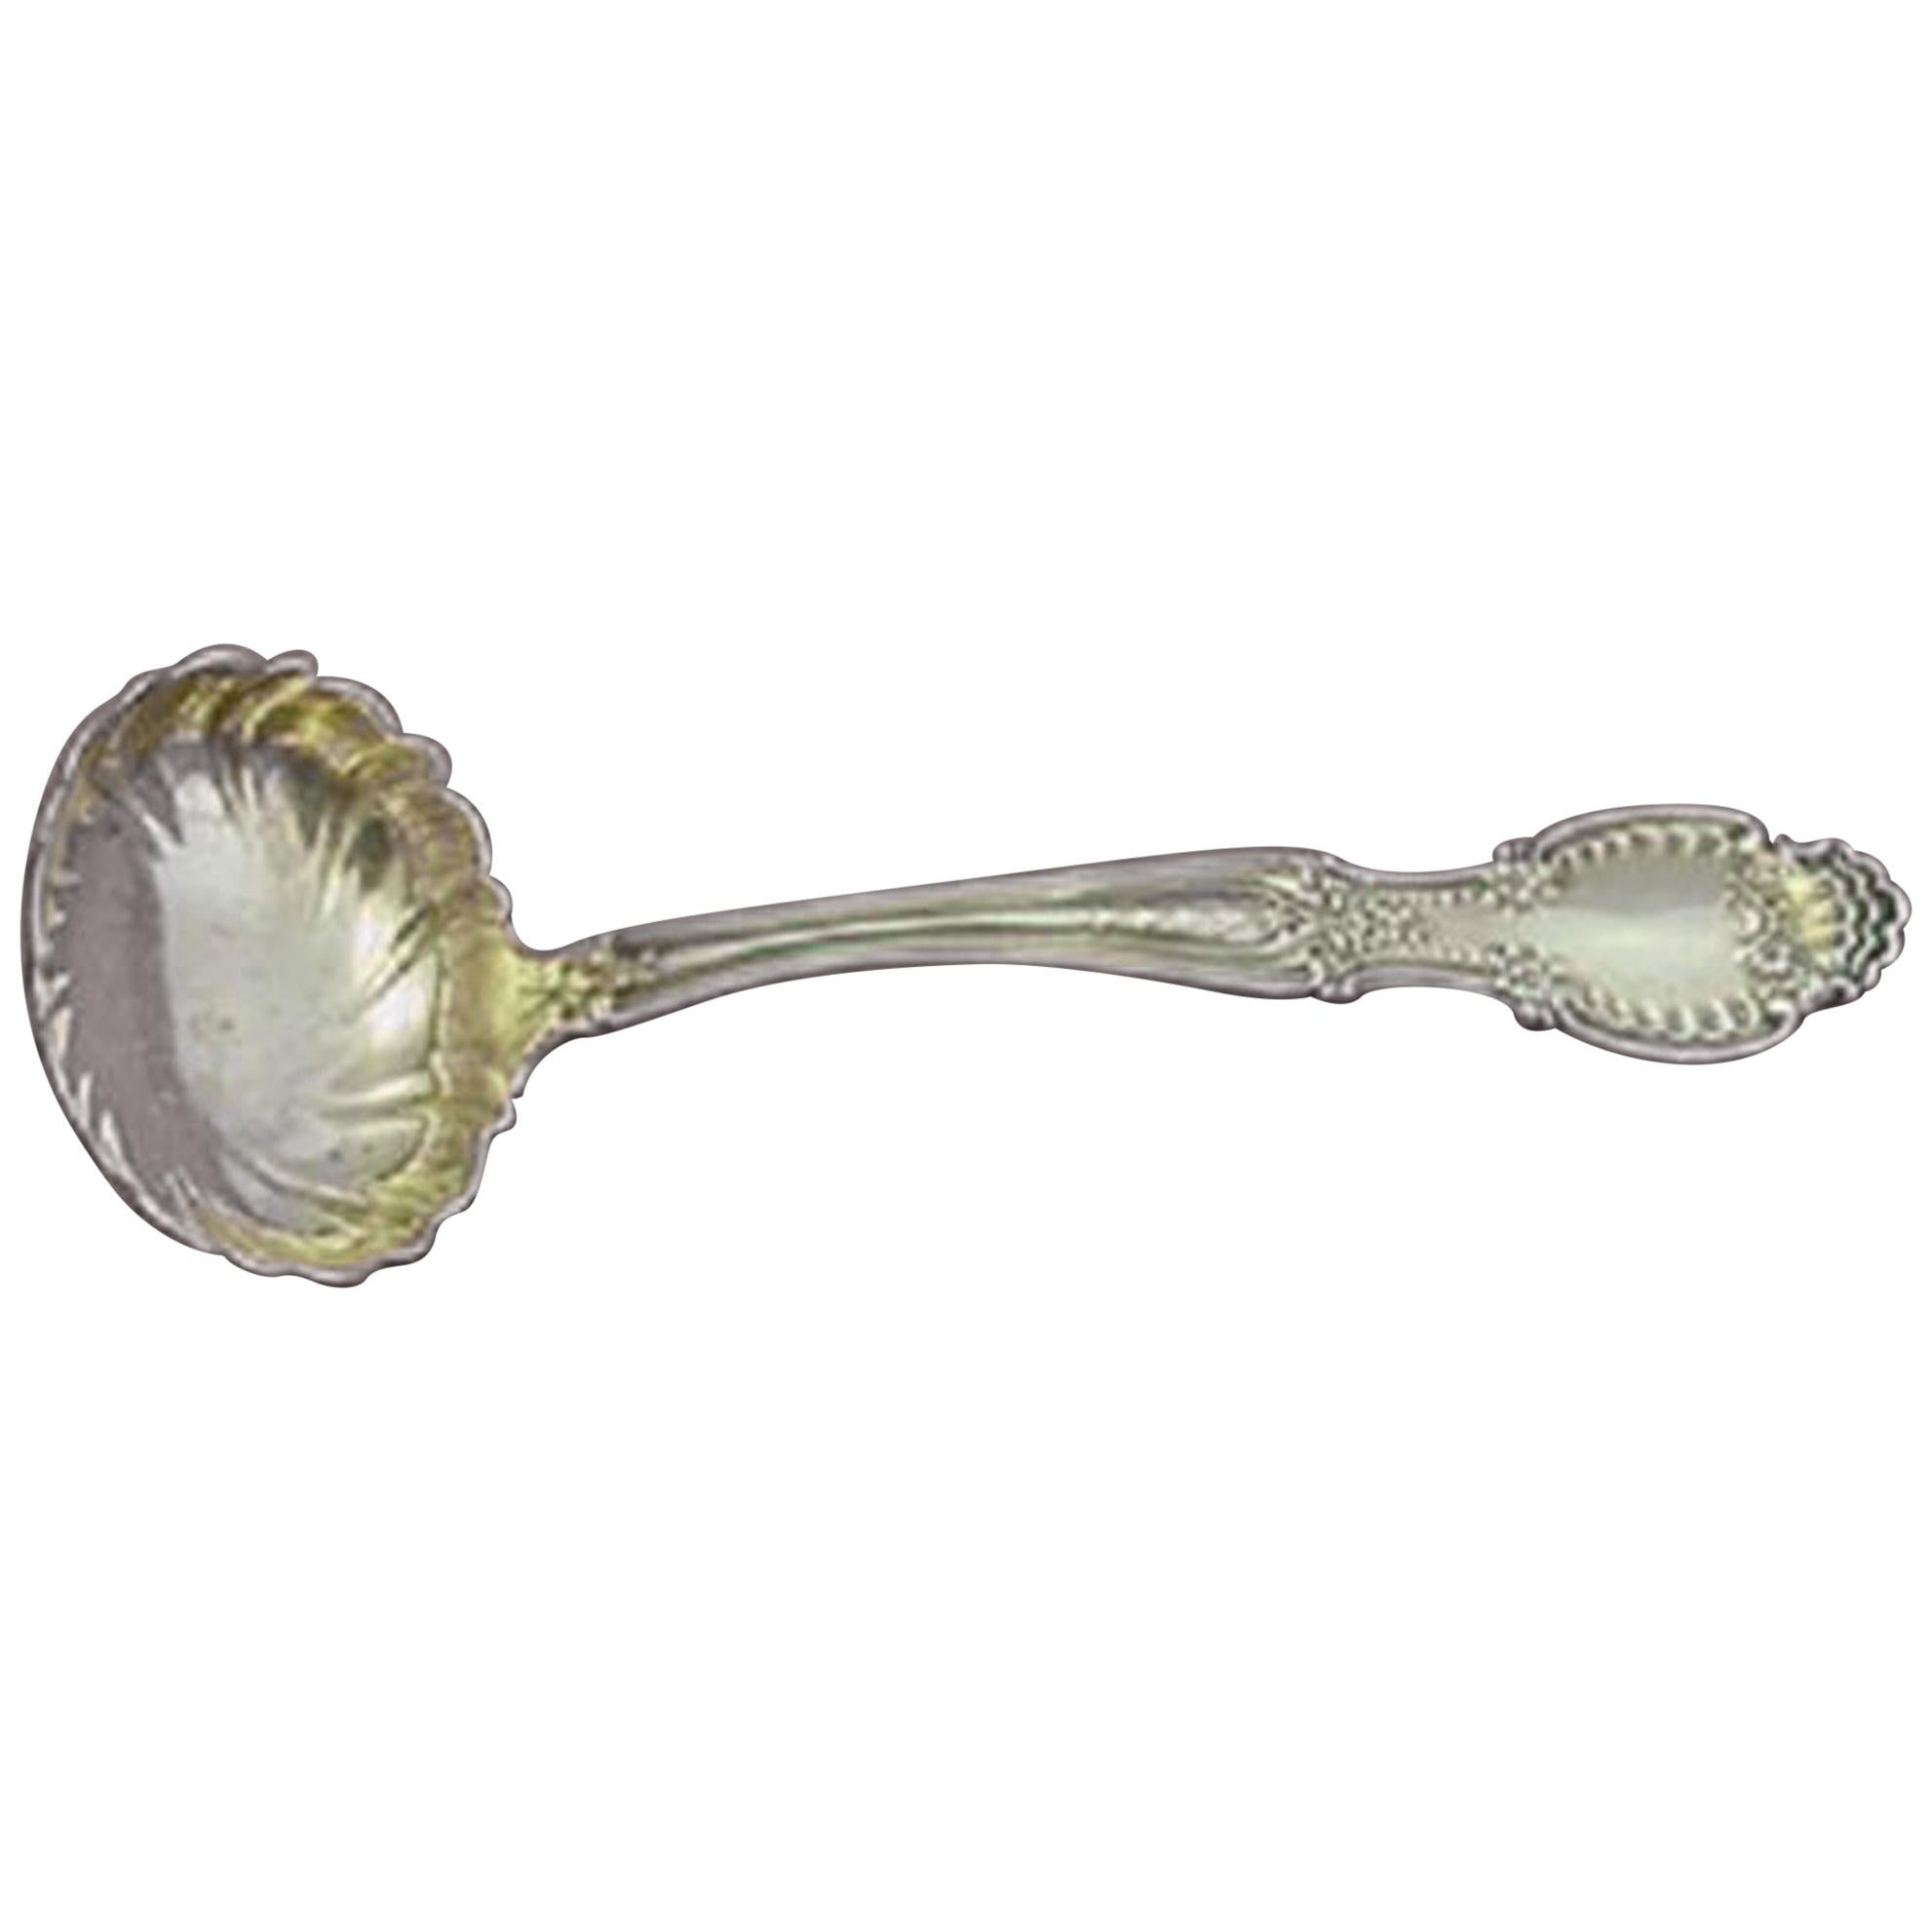 Richelieu by Tiffany & Co. Sterling Silver Sauce Ladle Fluted Bowl